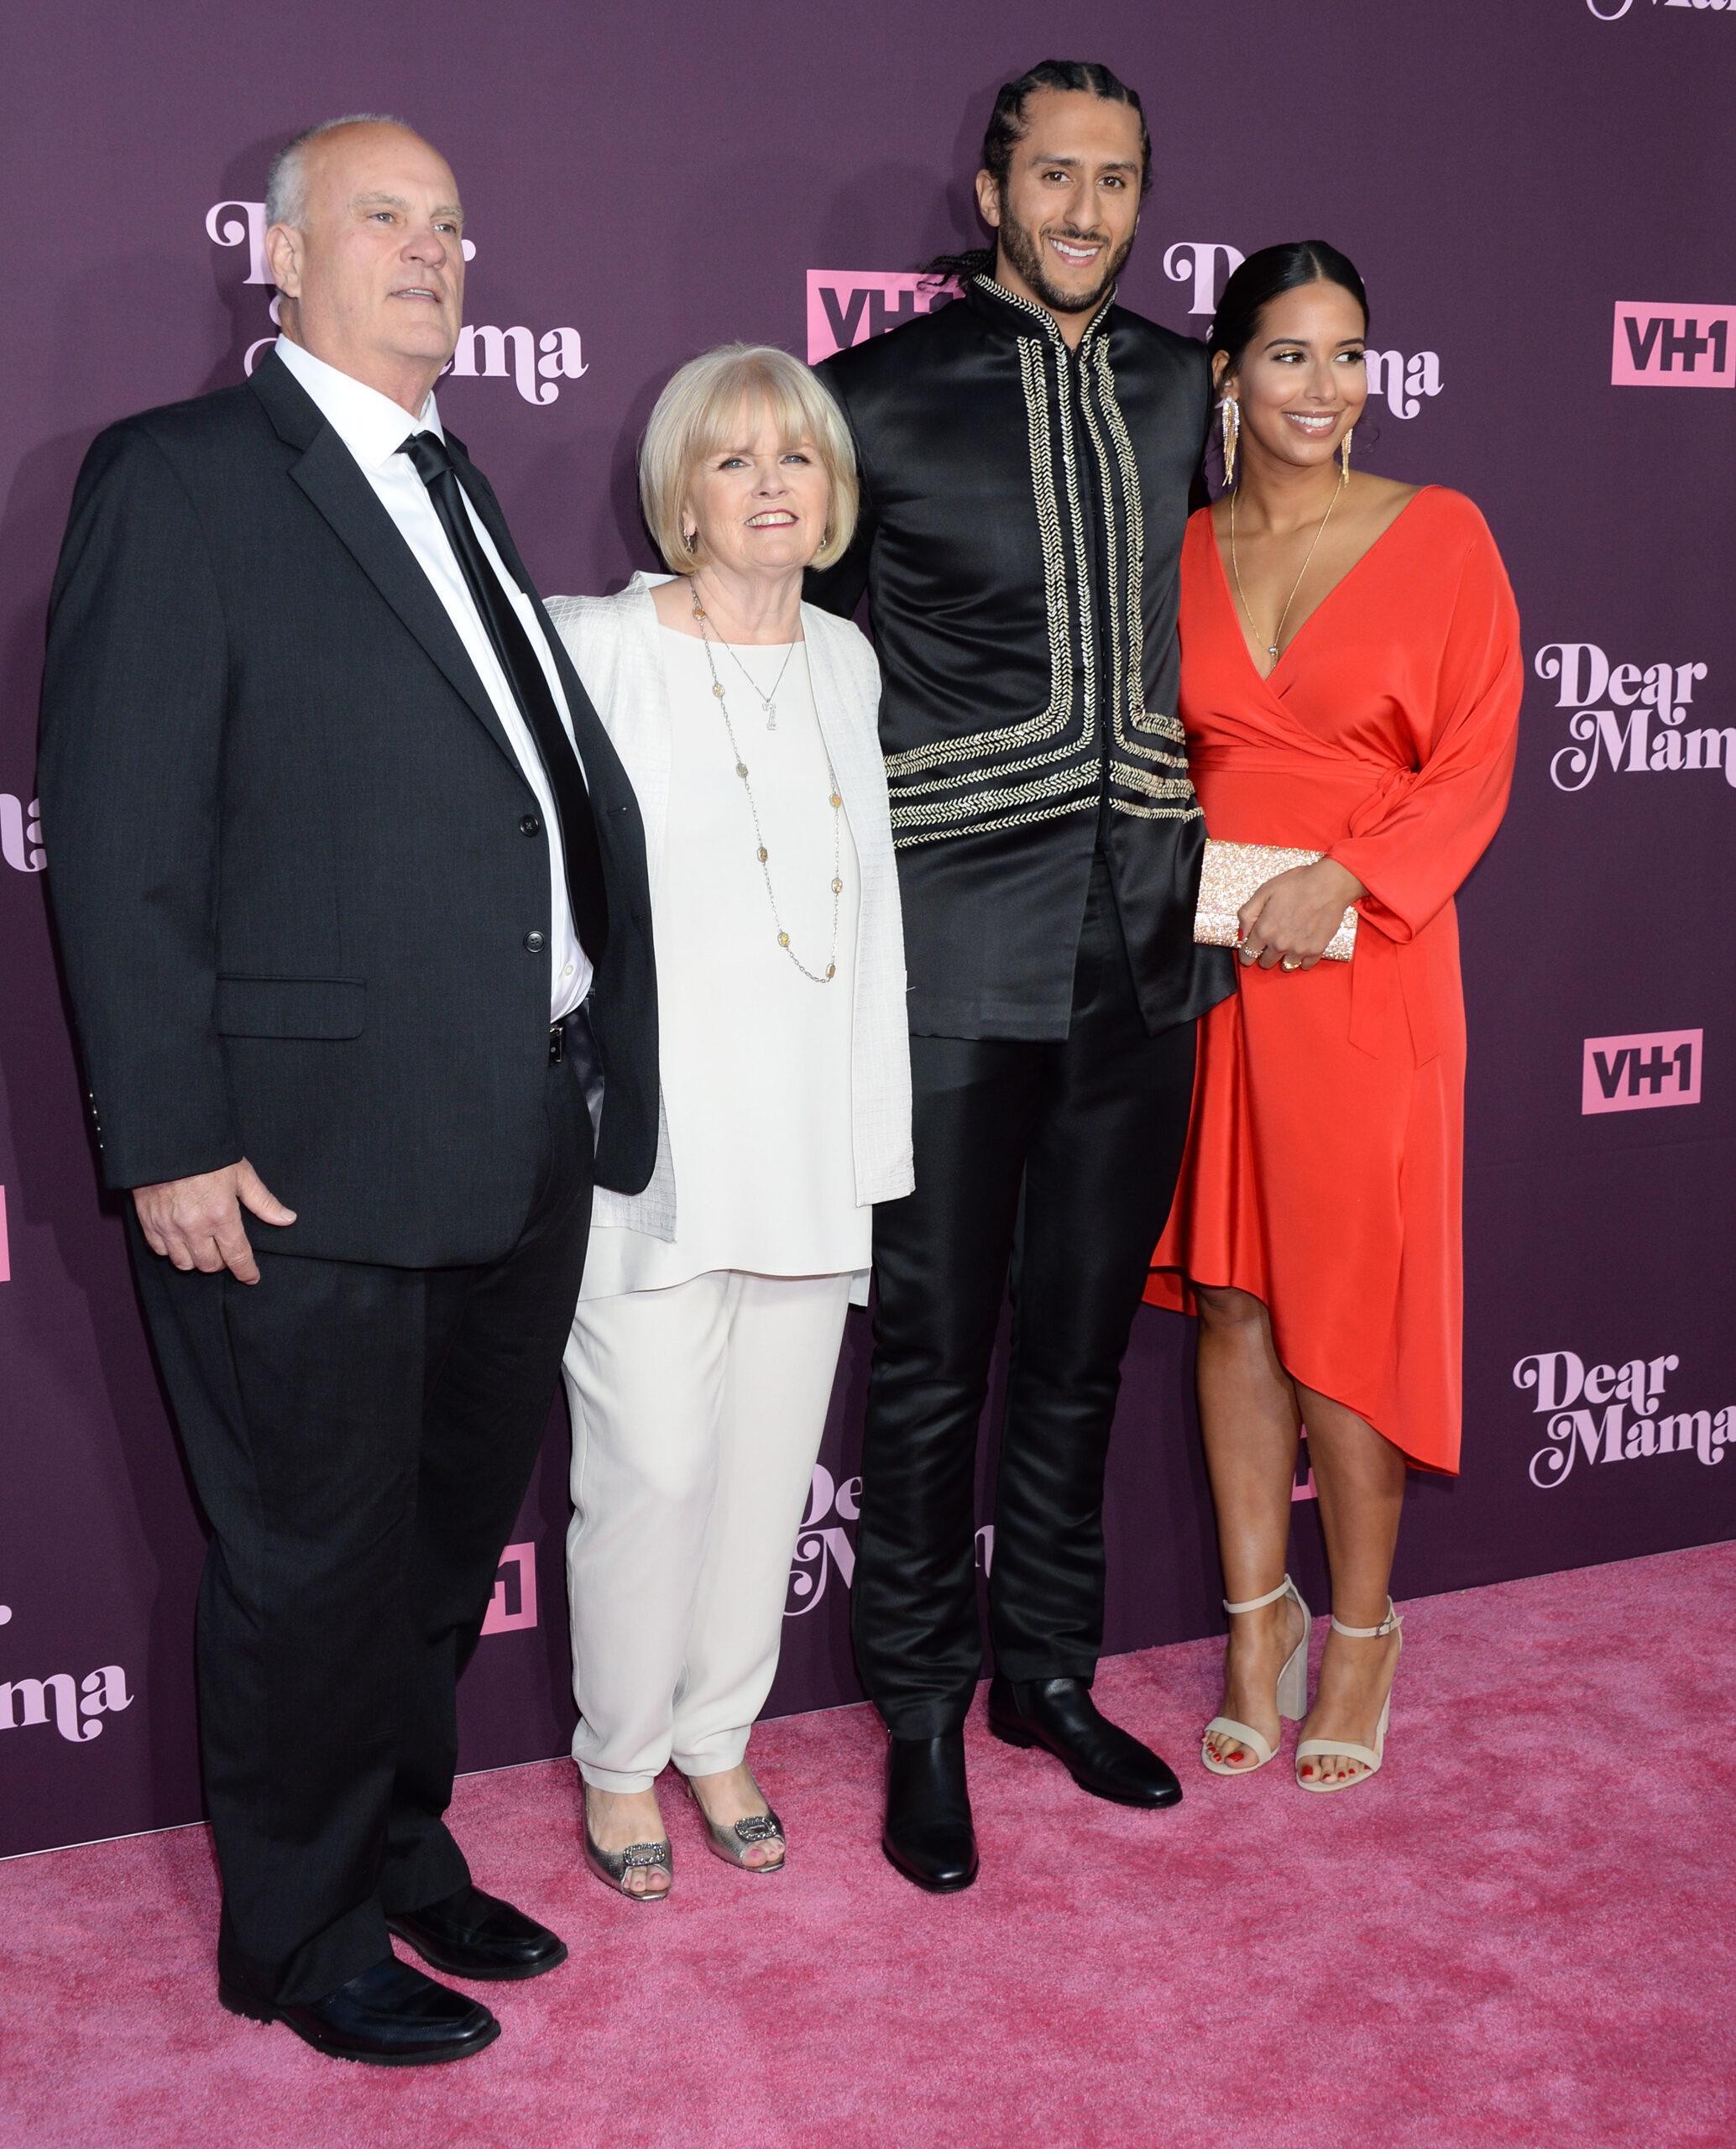 Colin Kaepernick with his parents and girlfriend